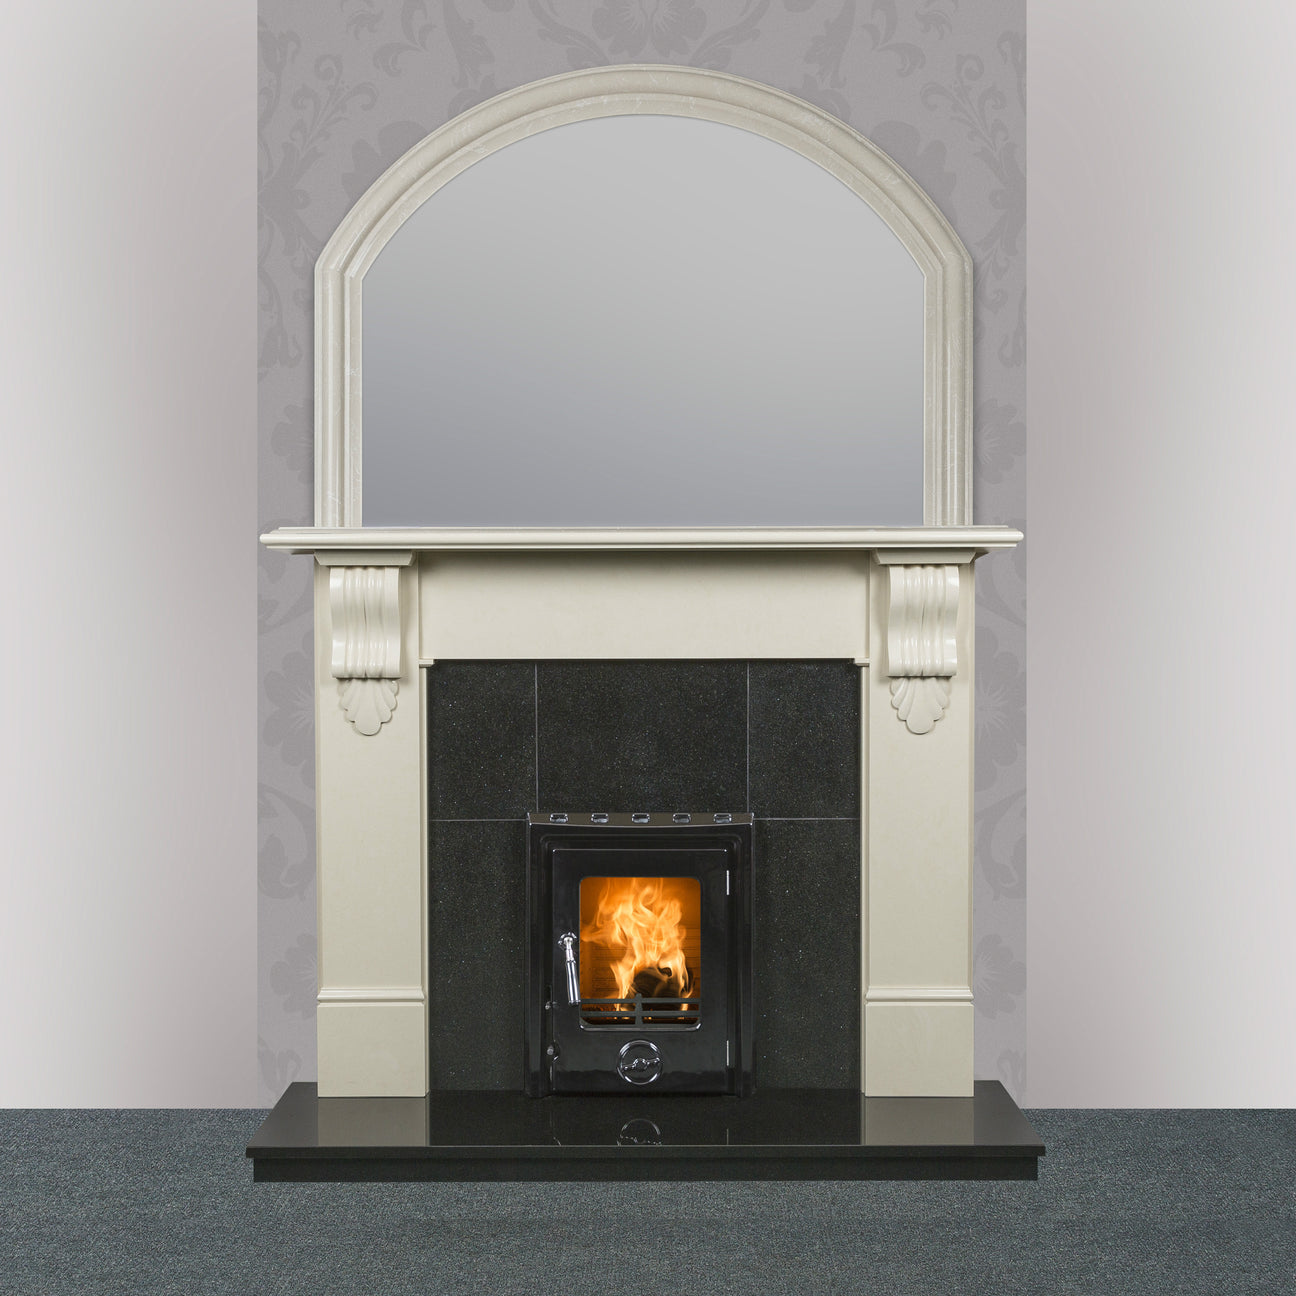 Kate Insert Stove Enamel Finish shown here with Victoria Fireplace